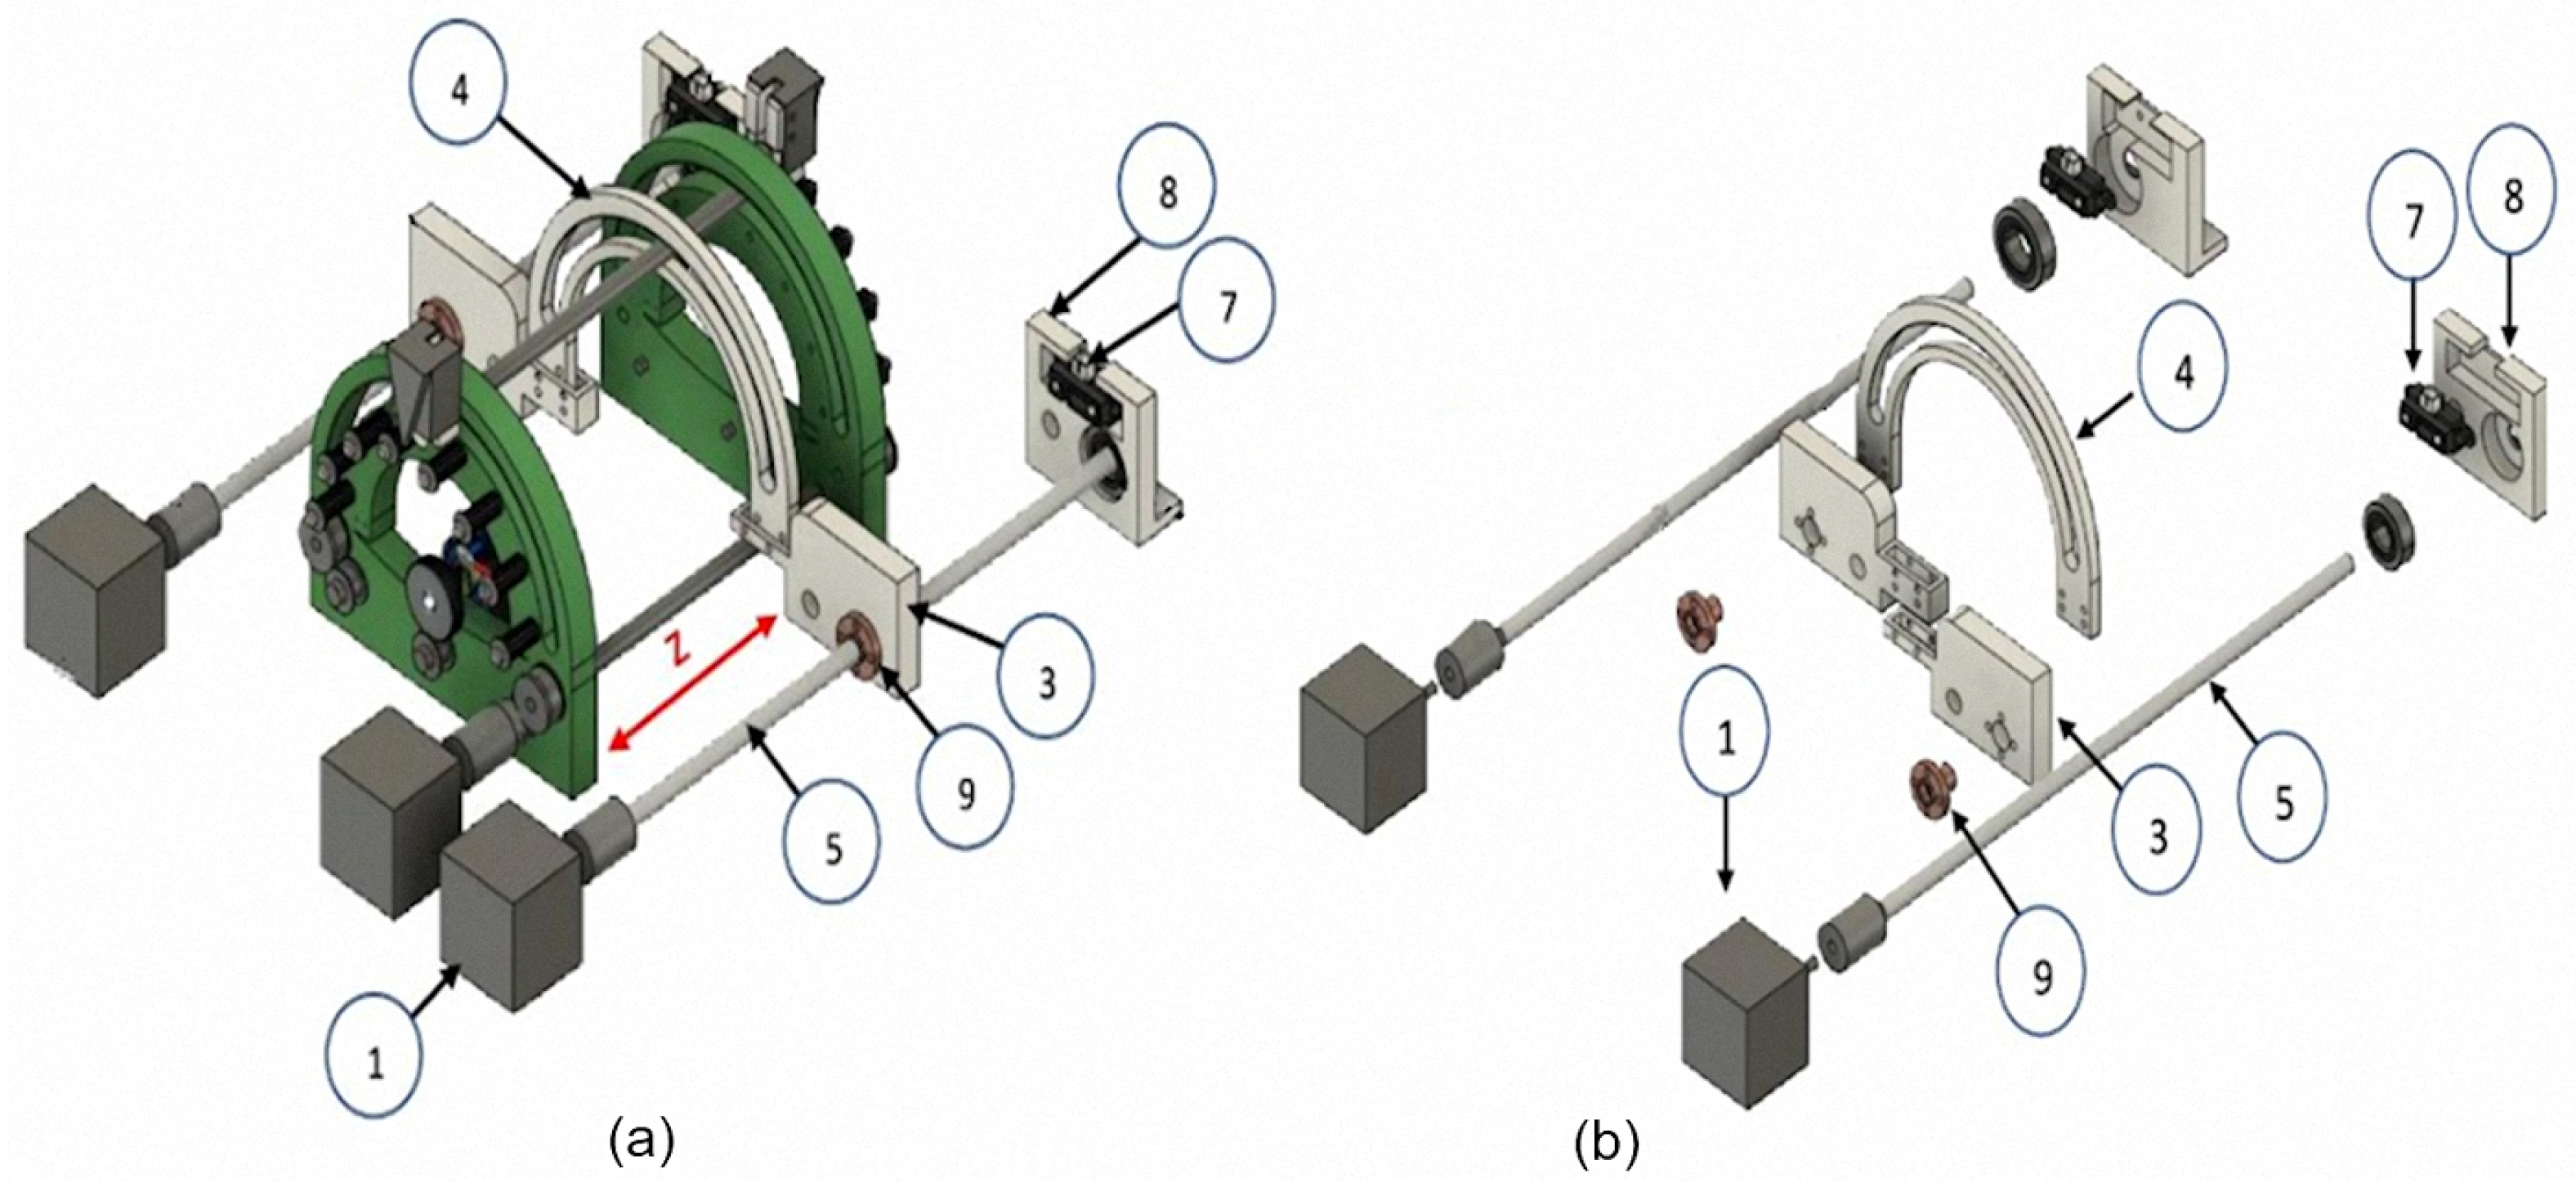 Applied Sciences | Free Full-Text | Stereotactic Positioning System:  Towards a Mechanism Used in Thermal Ablation Therapy | HTML